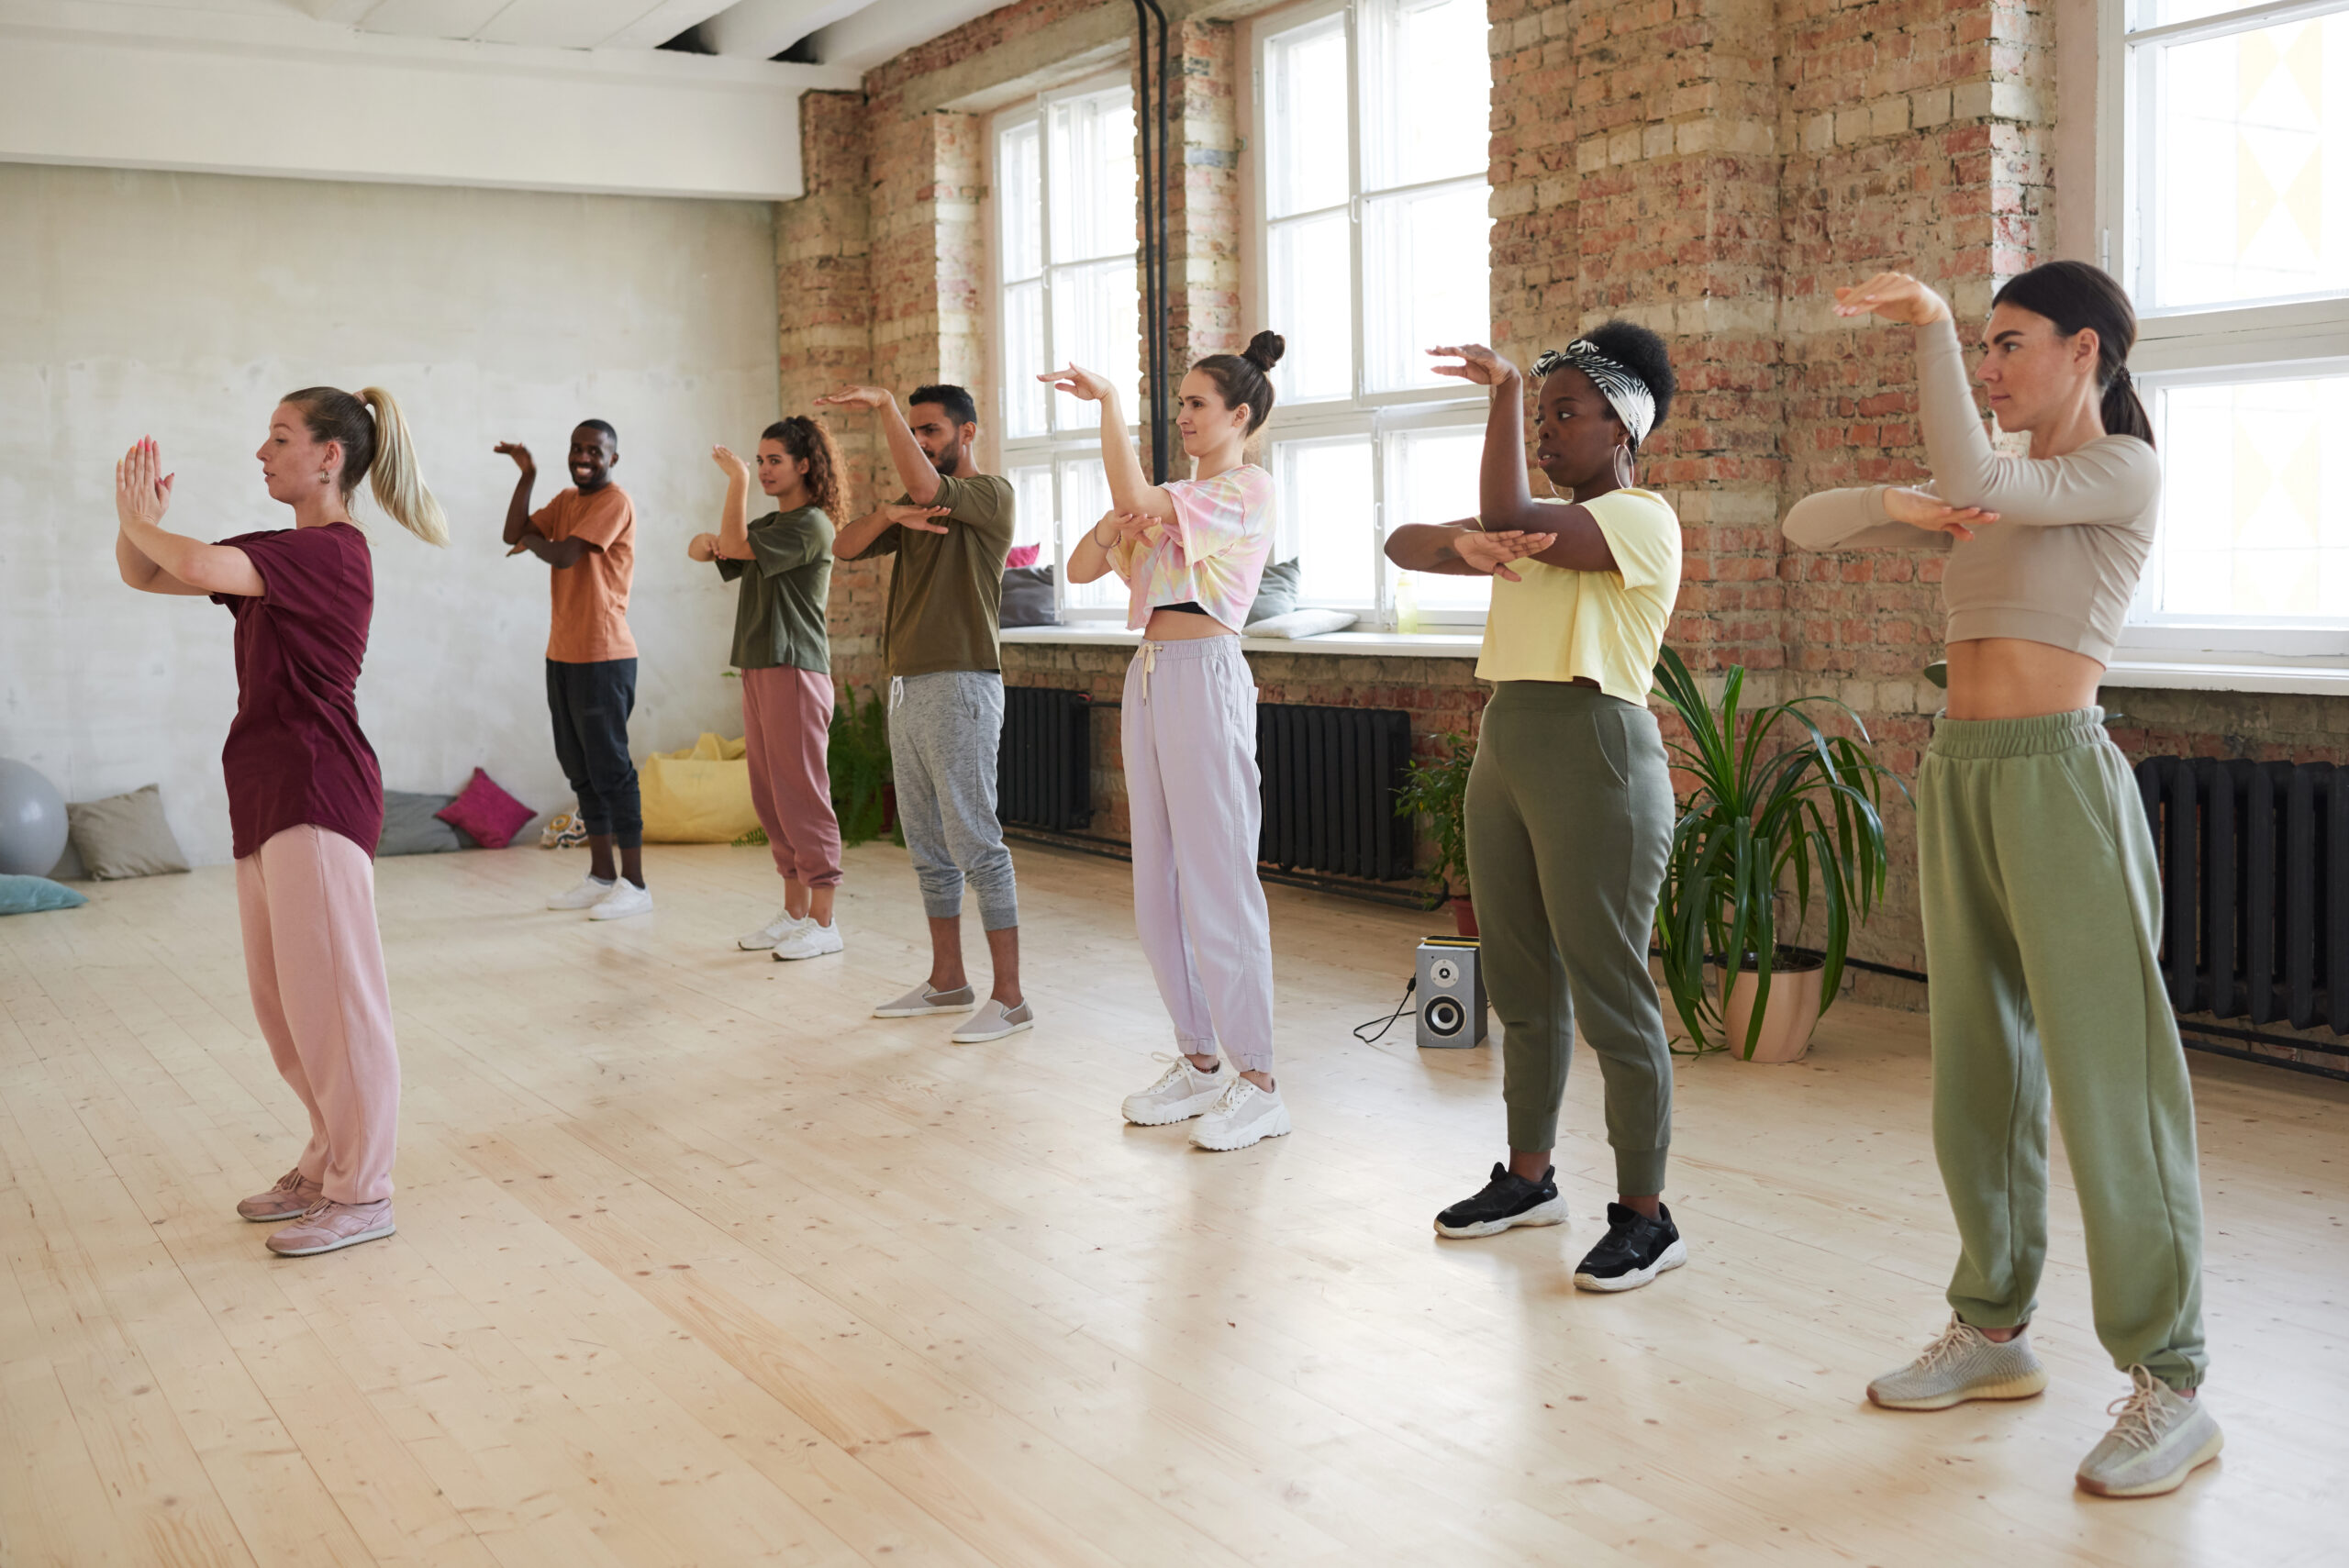 Group of people standing and repeating the movements of the instructor in dance exercise class